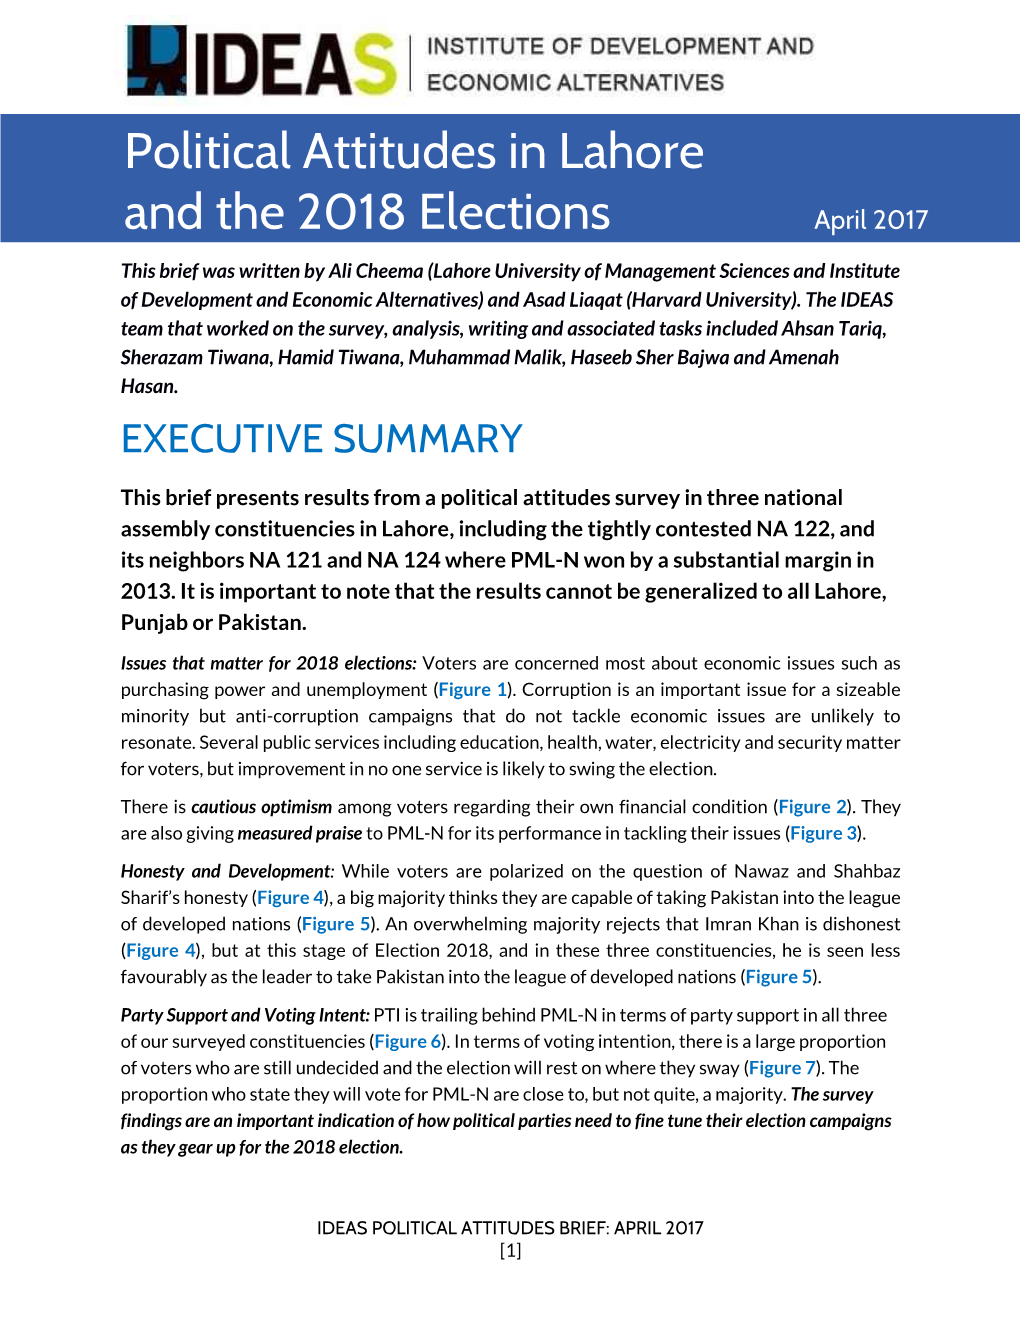 Political Attitudes in Lahore and the 2018 Elections April 2017